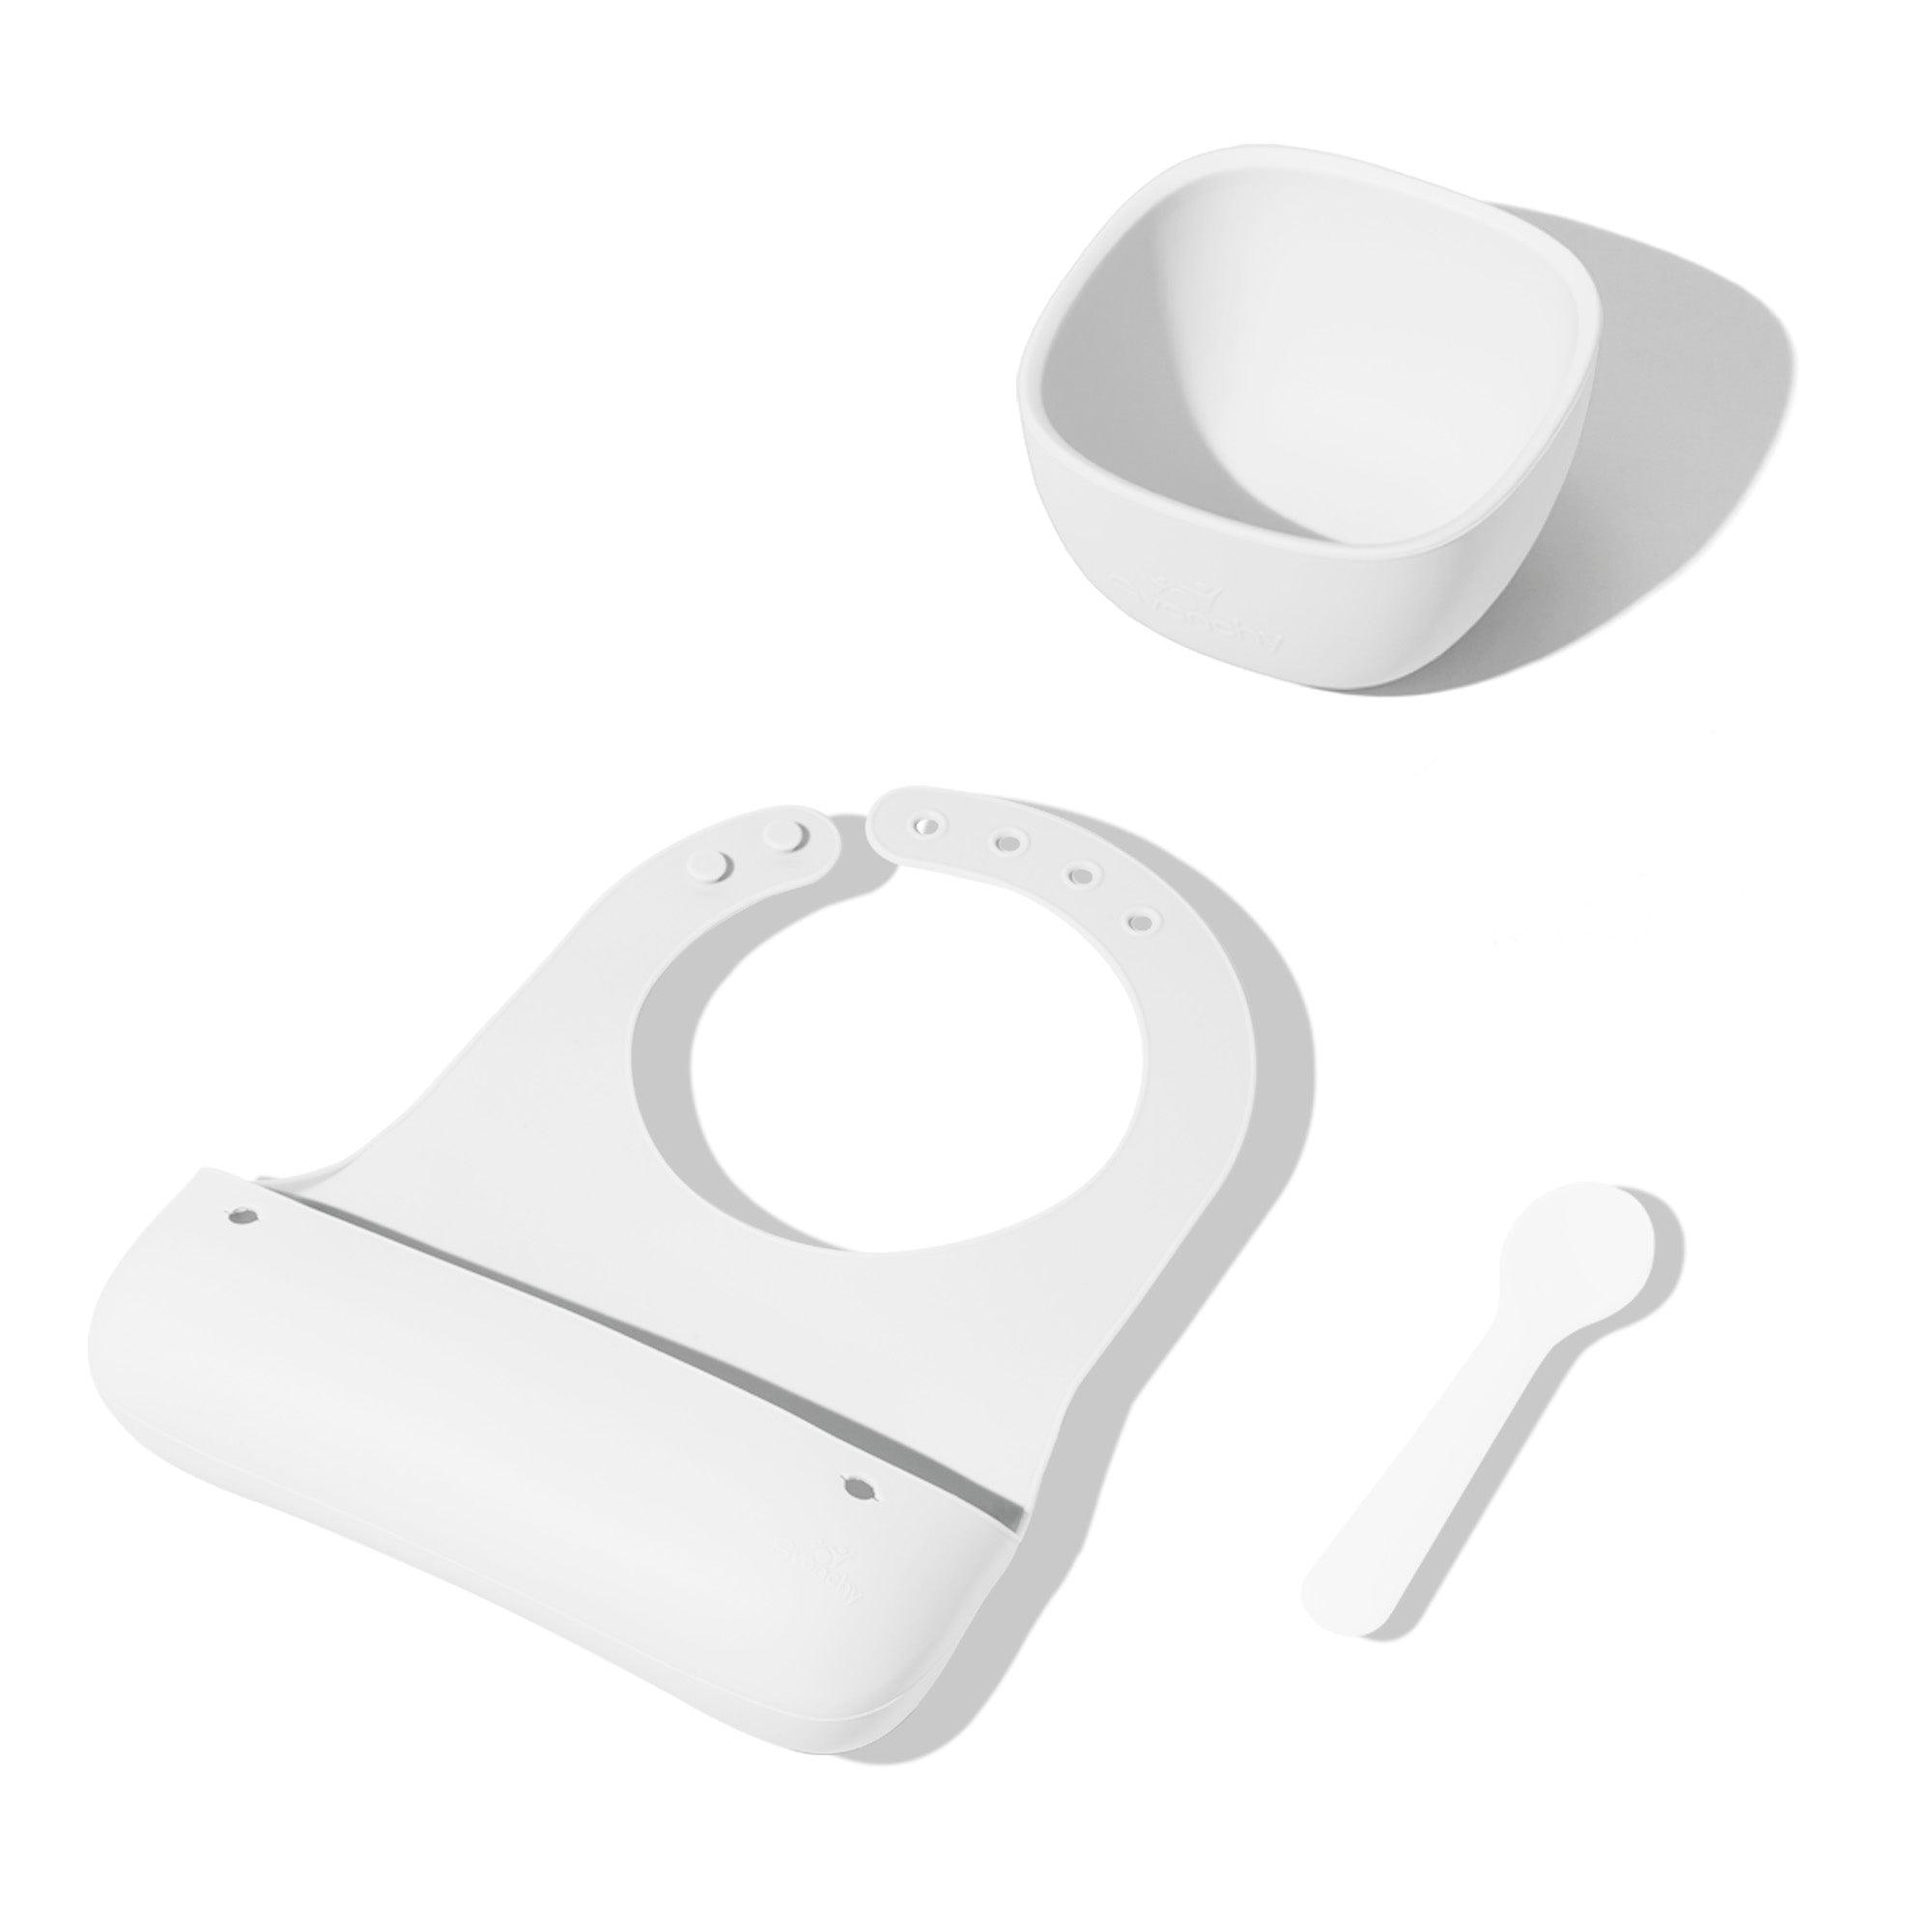 Early Feeding Silicone Bibs Gift Set - Avanchy Sustainable Baby Dishware